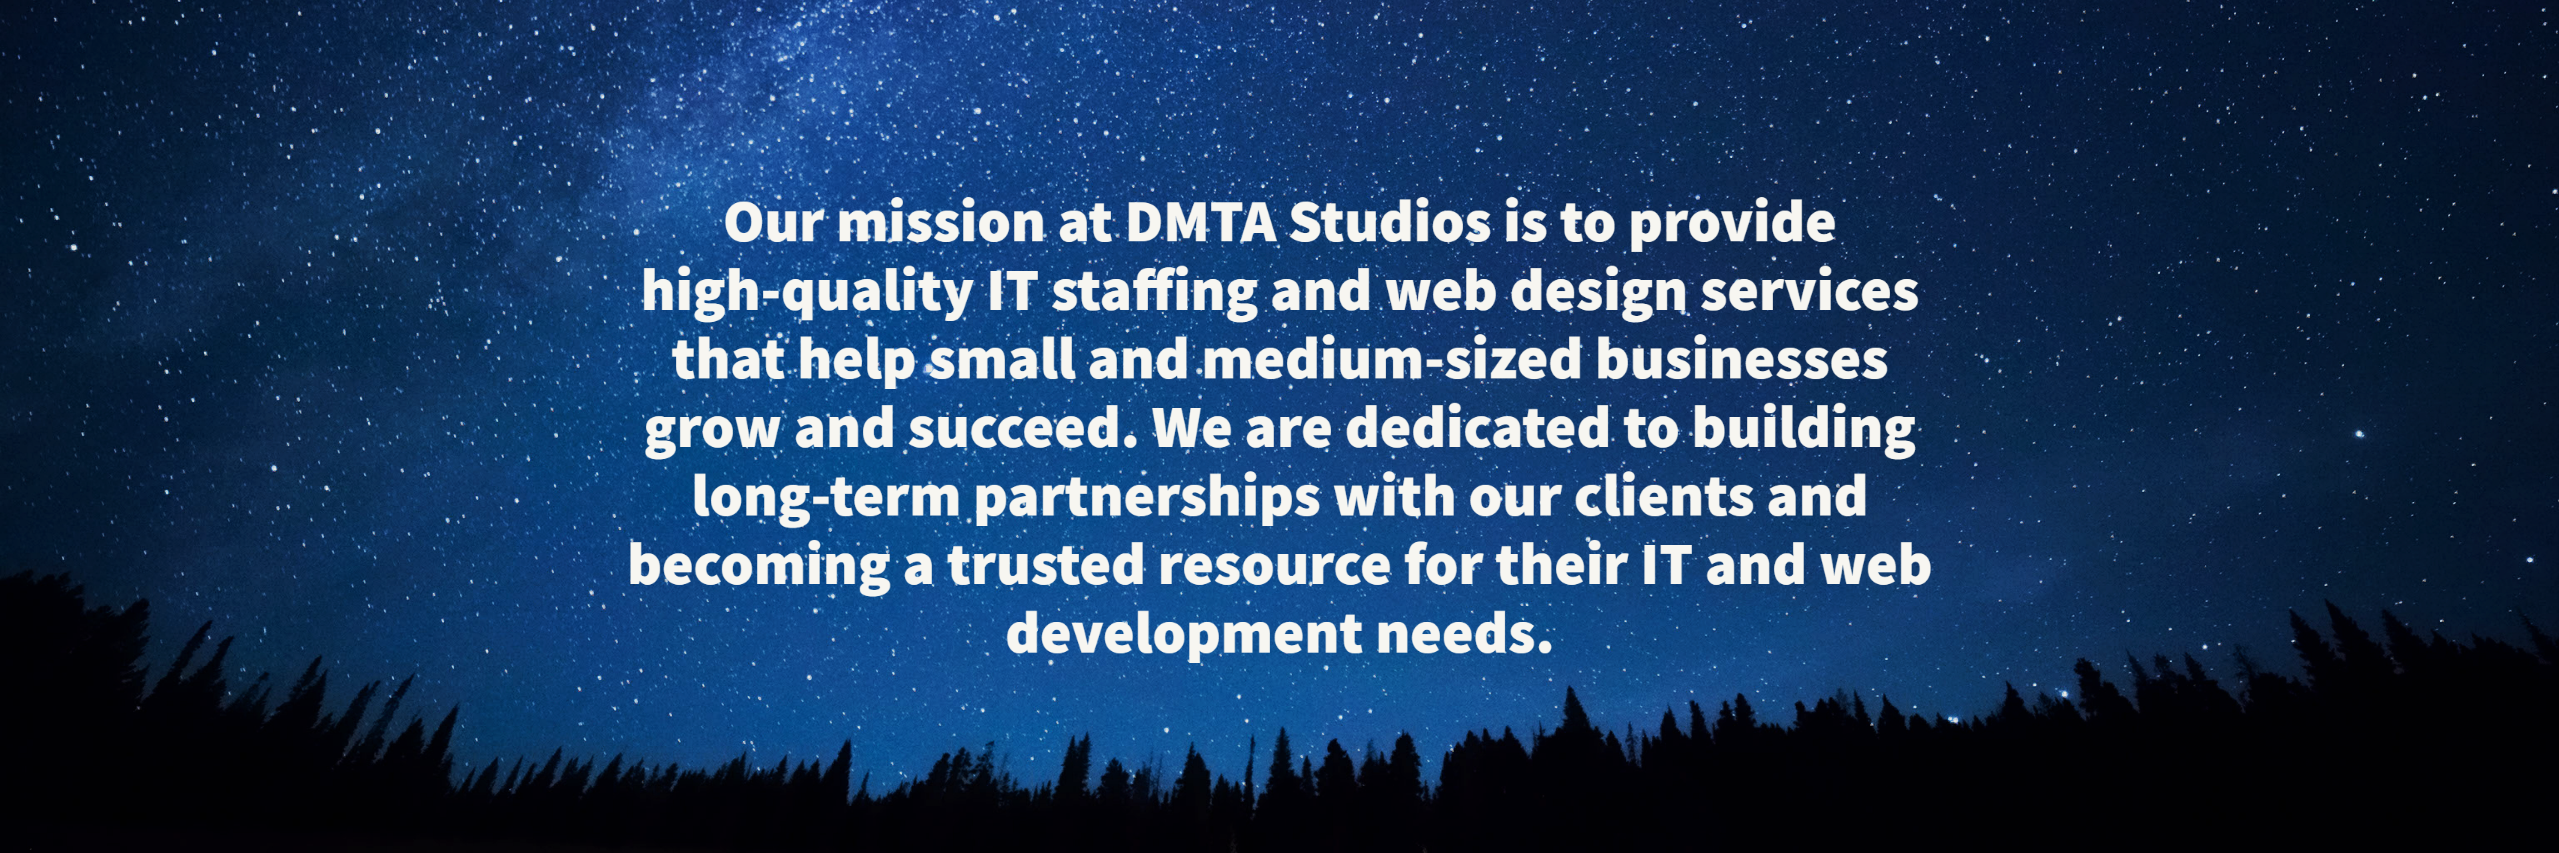 Our mission at DMTA Studios is to provide high-quality IT staffing and web design services that help small and medium-sized businesses grow and succeed. We are dedicated to building long-term partnerships with our clients and becoming a trusted resource for their IT and web development needs. 